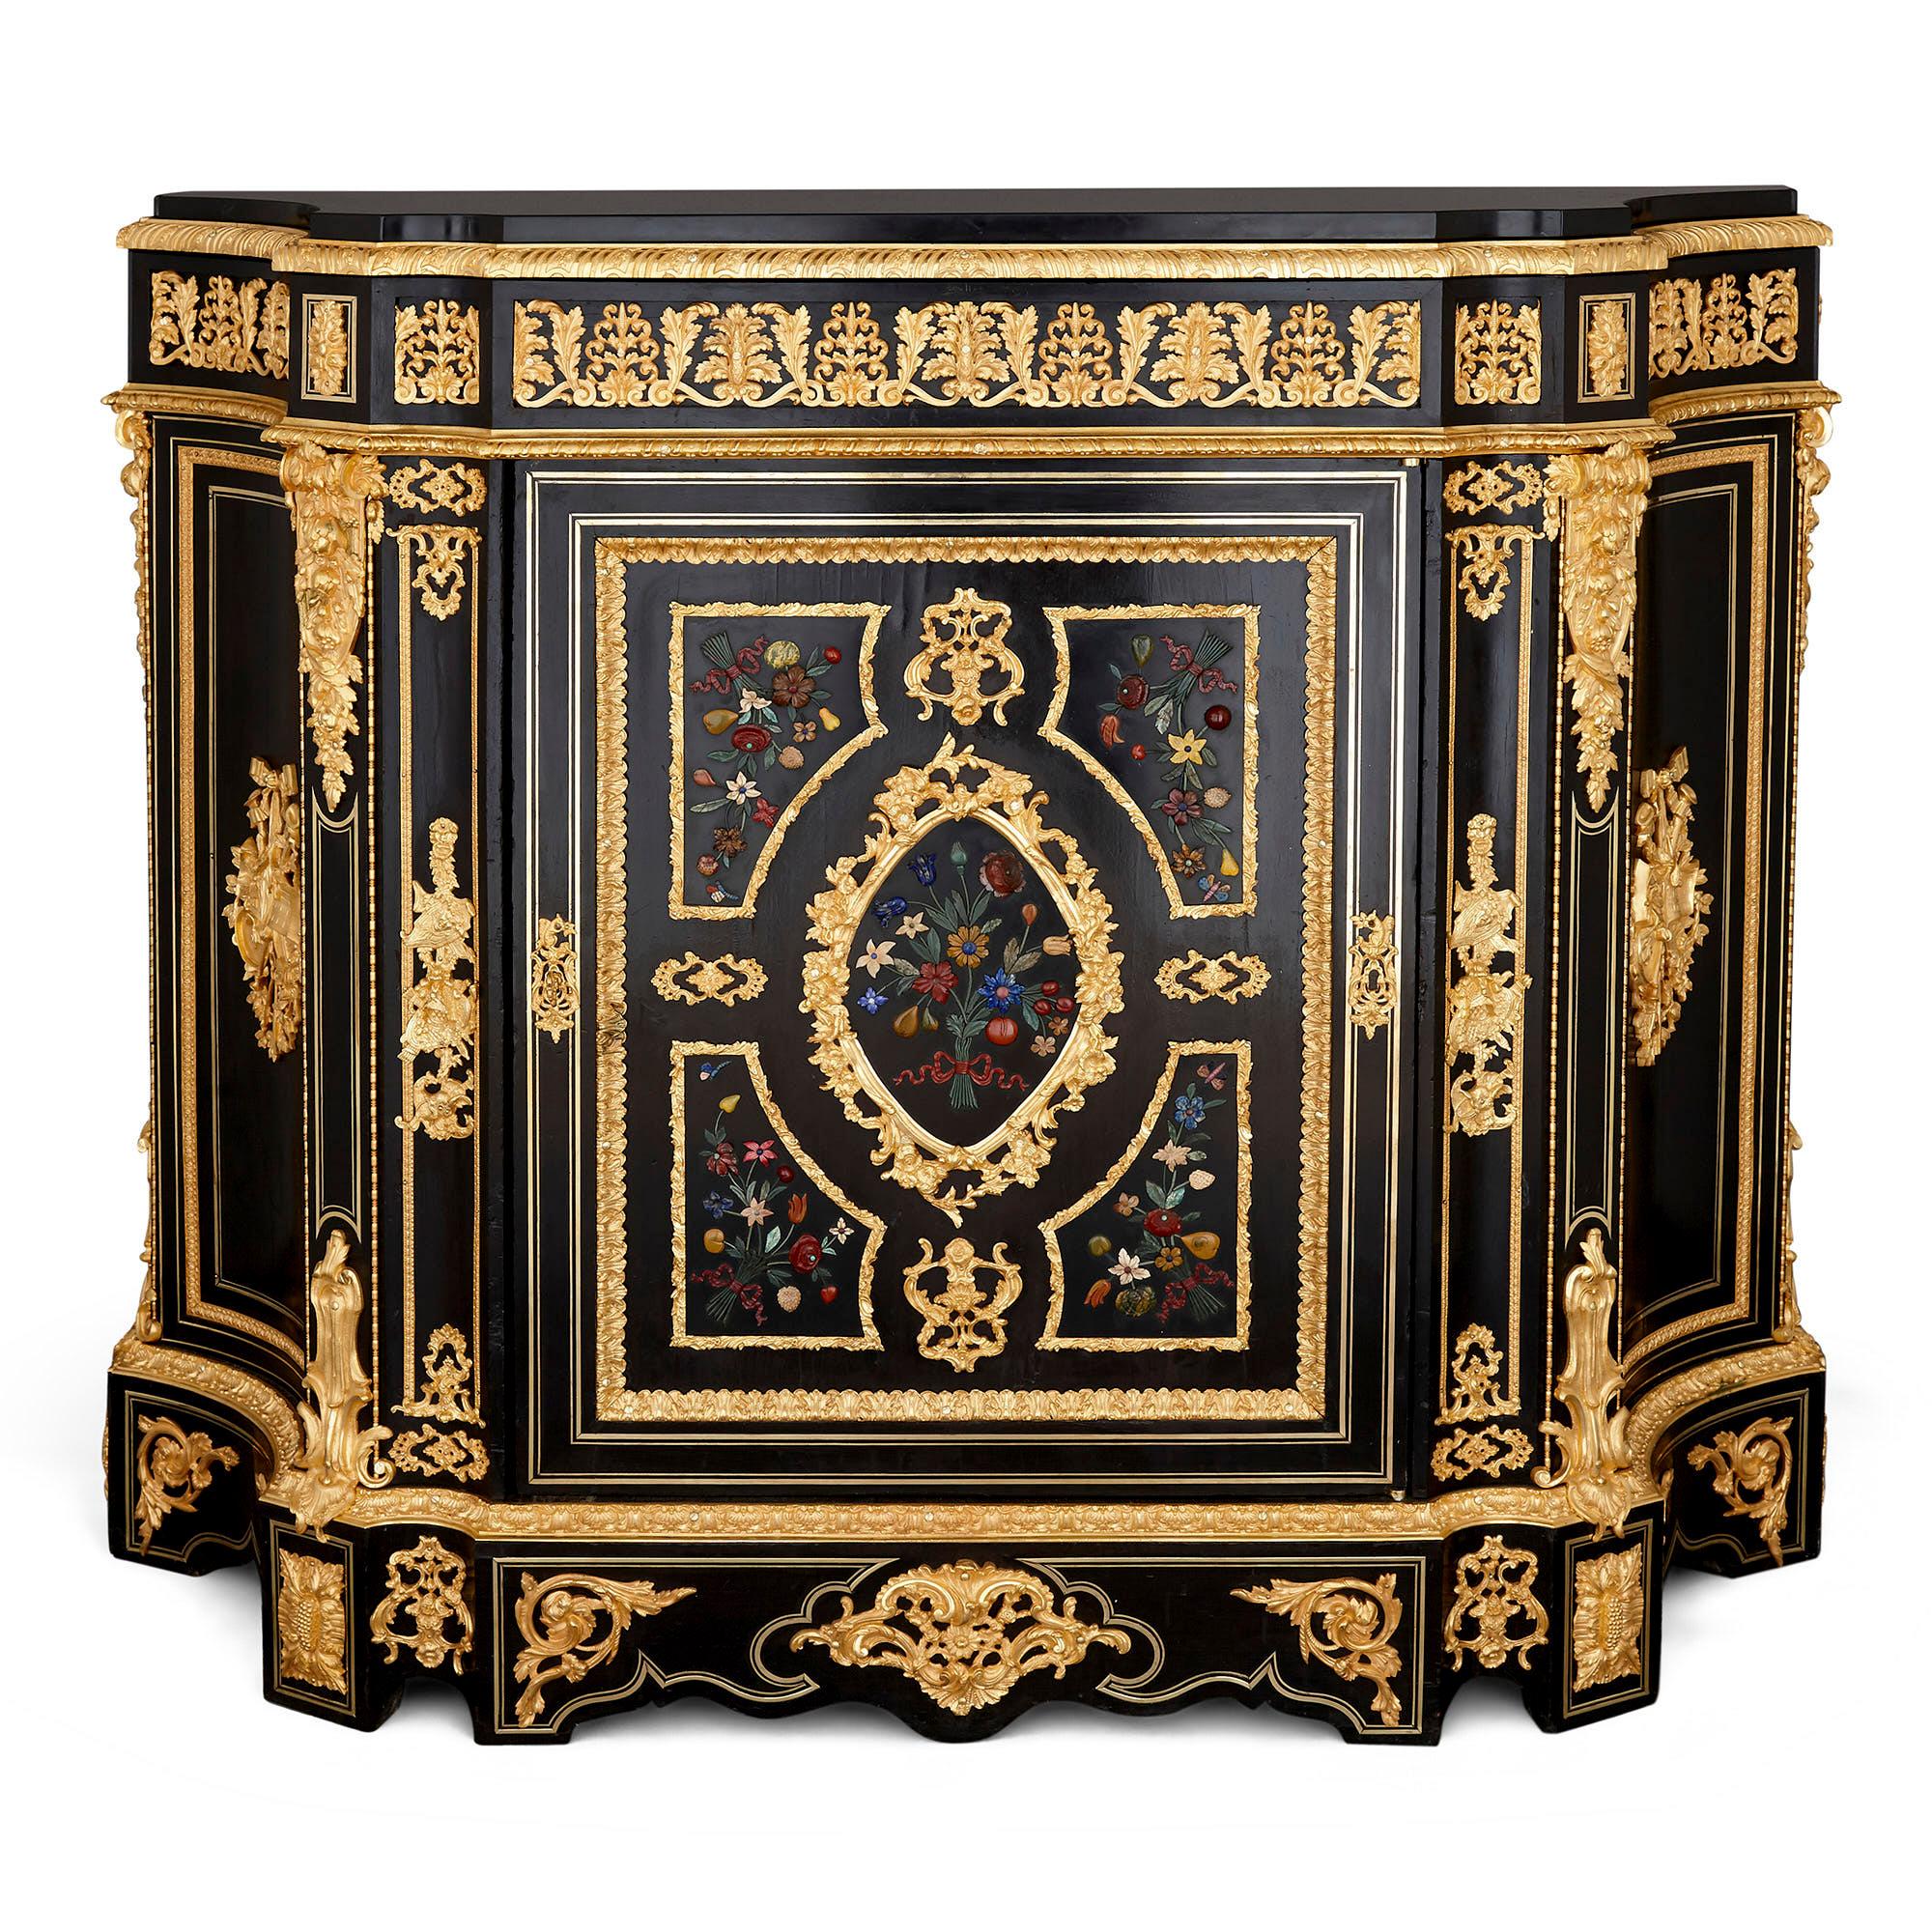 Neoclassical Two Antique Ebonized Wood and Ormolu Cabinets with Hardstone Pietra Dura Inlay For Sale